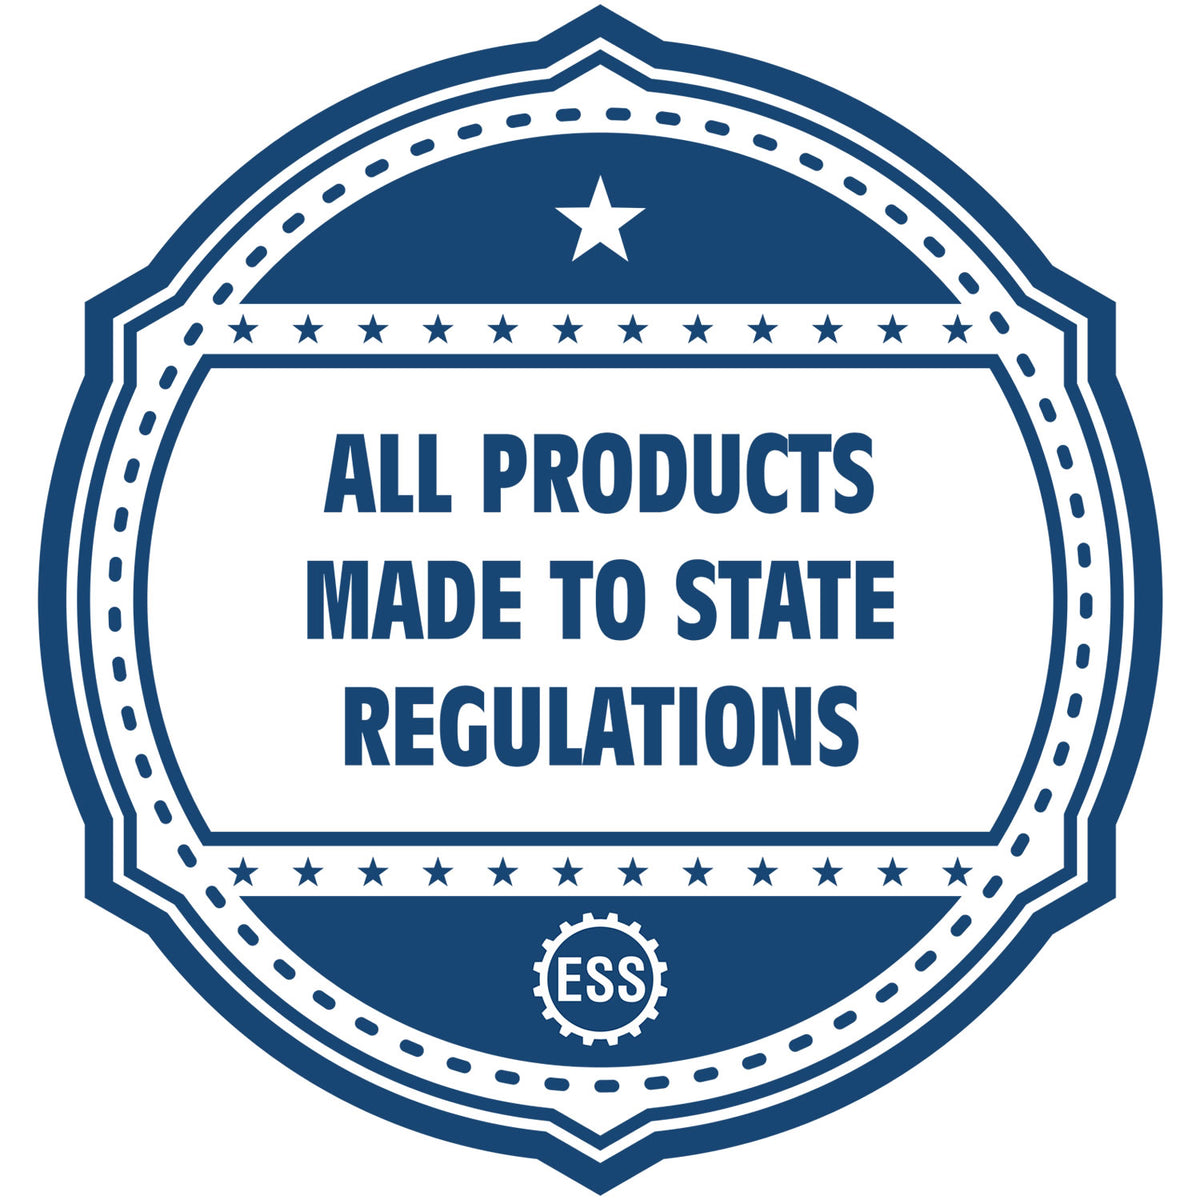 An icon or badge element for the Handheld Arkansas Professional Engineer Embosser showing that this product is made in compliance with state regulations.